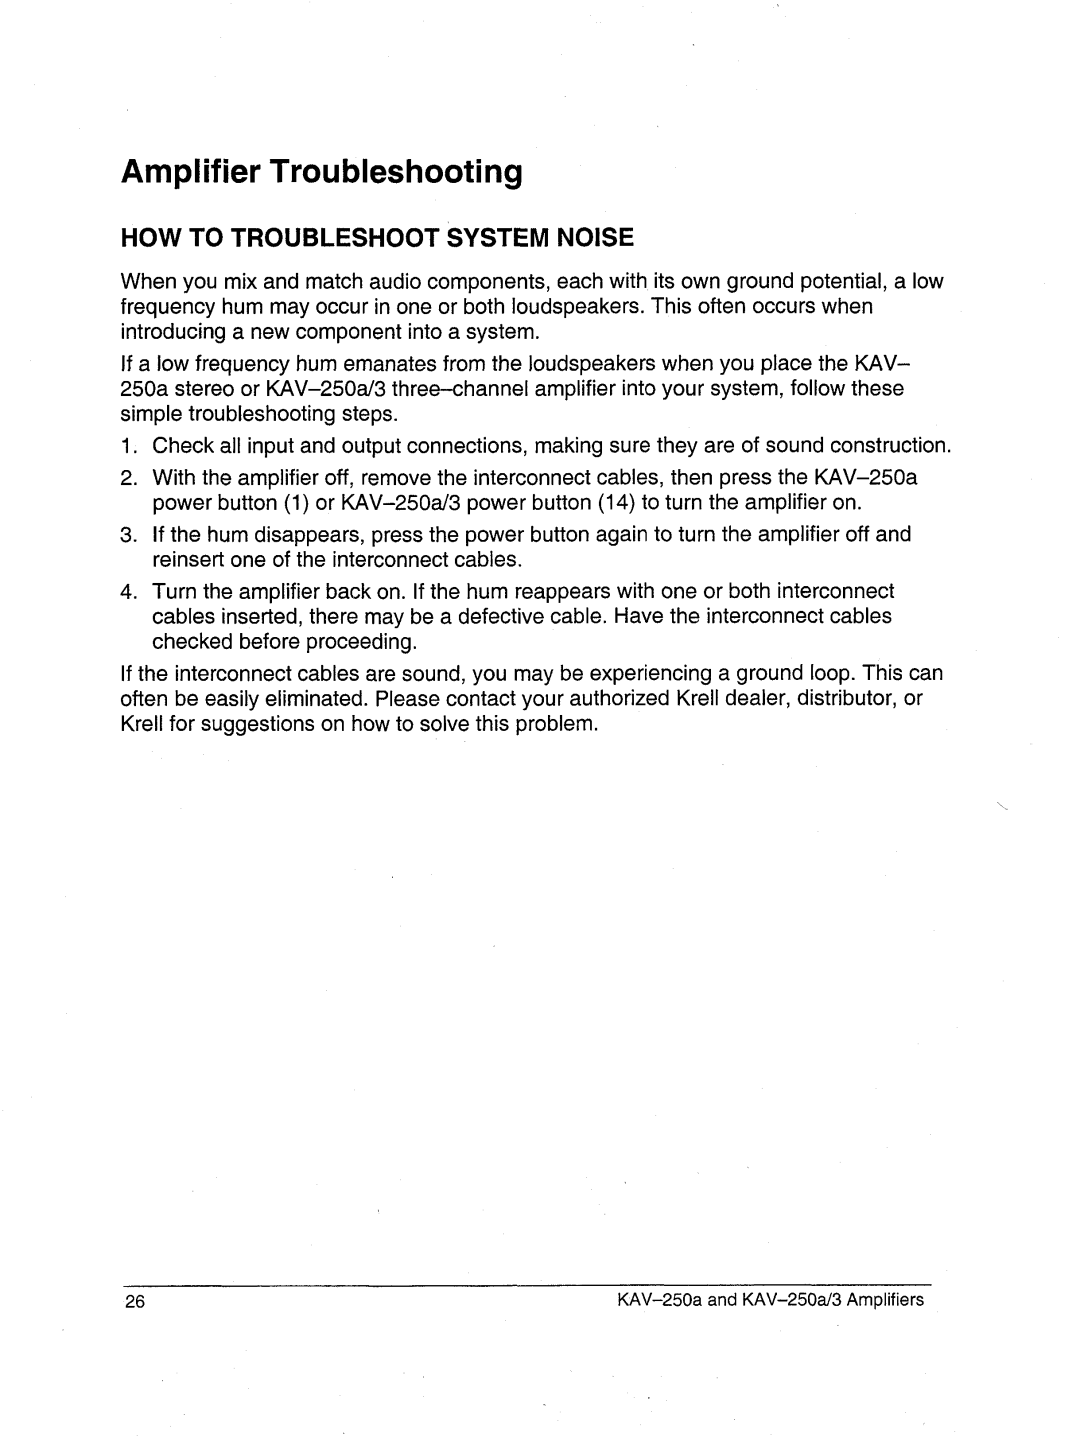 Krell Industries KAV-250a/3 manual Amplifier Troubleshooting, How To Troubleshoot System Noise 